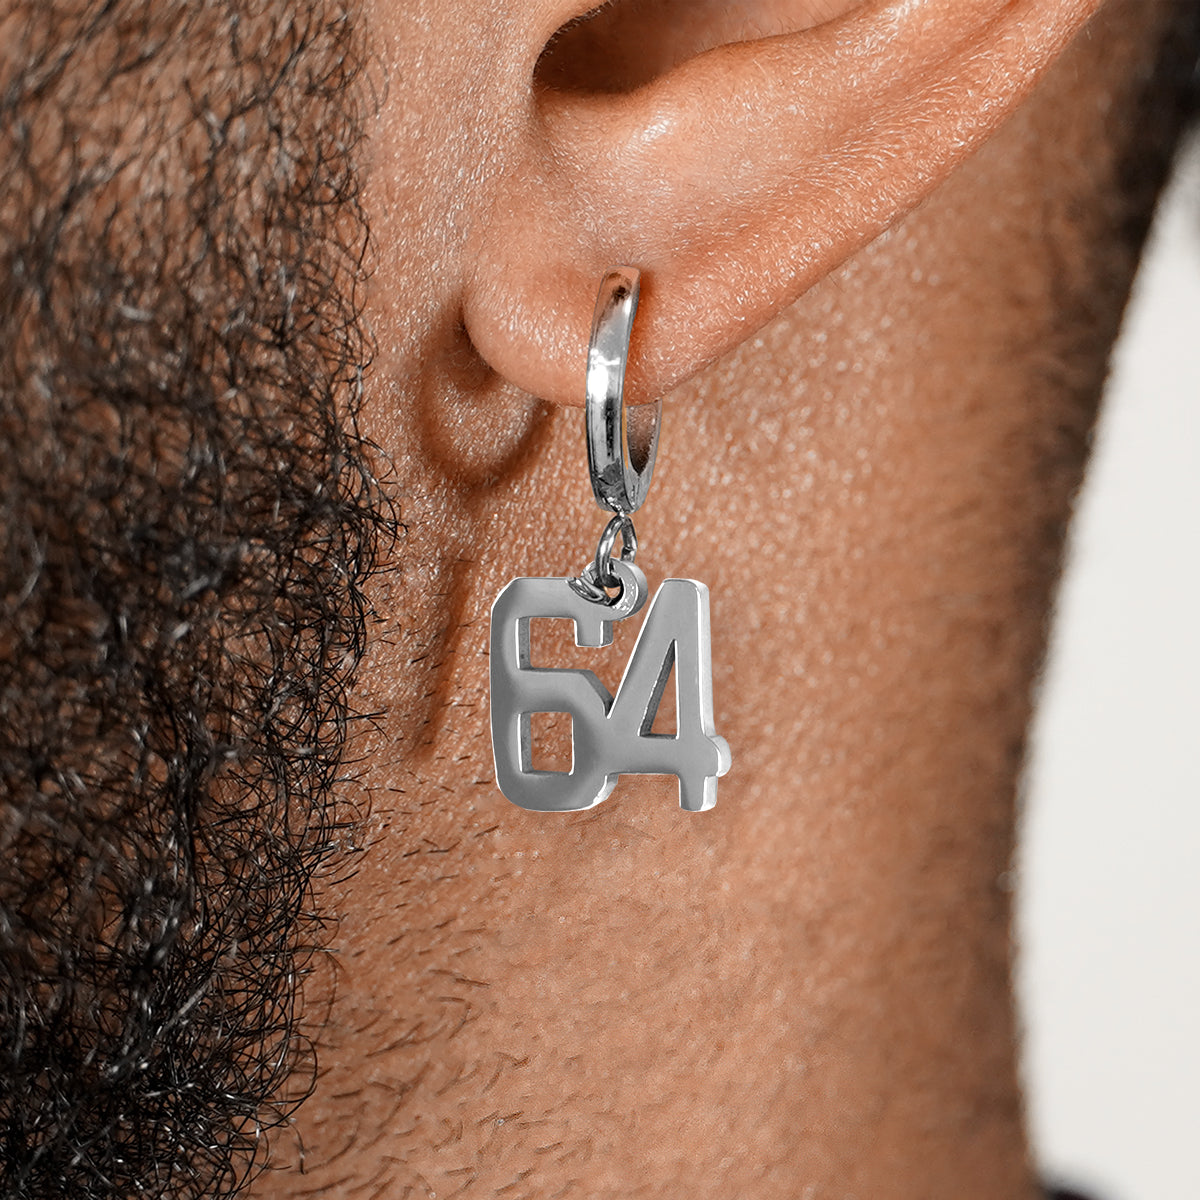 64 Number Earring - Stainless Steel